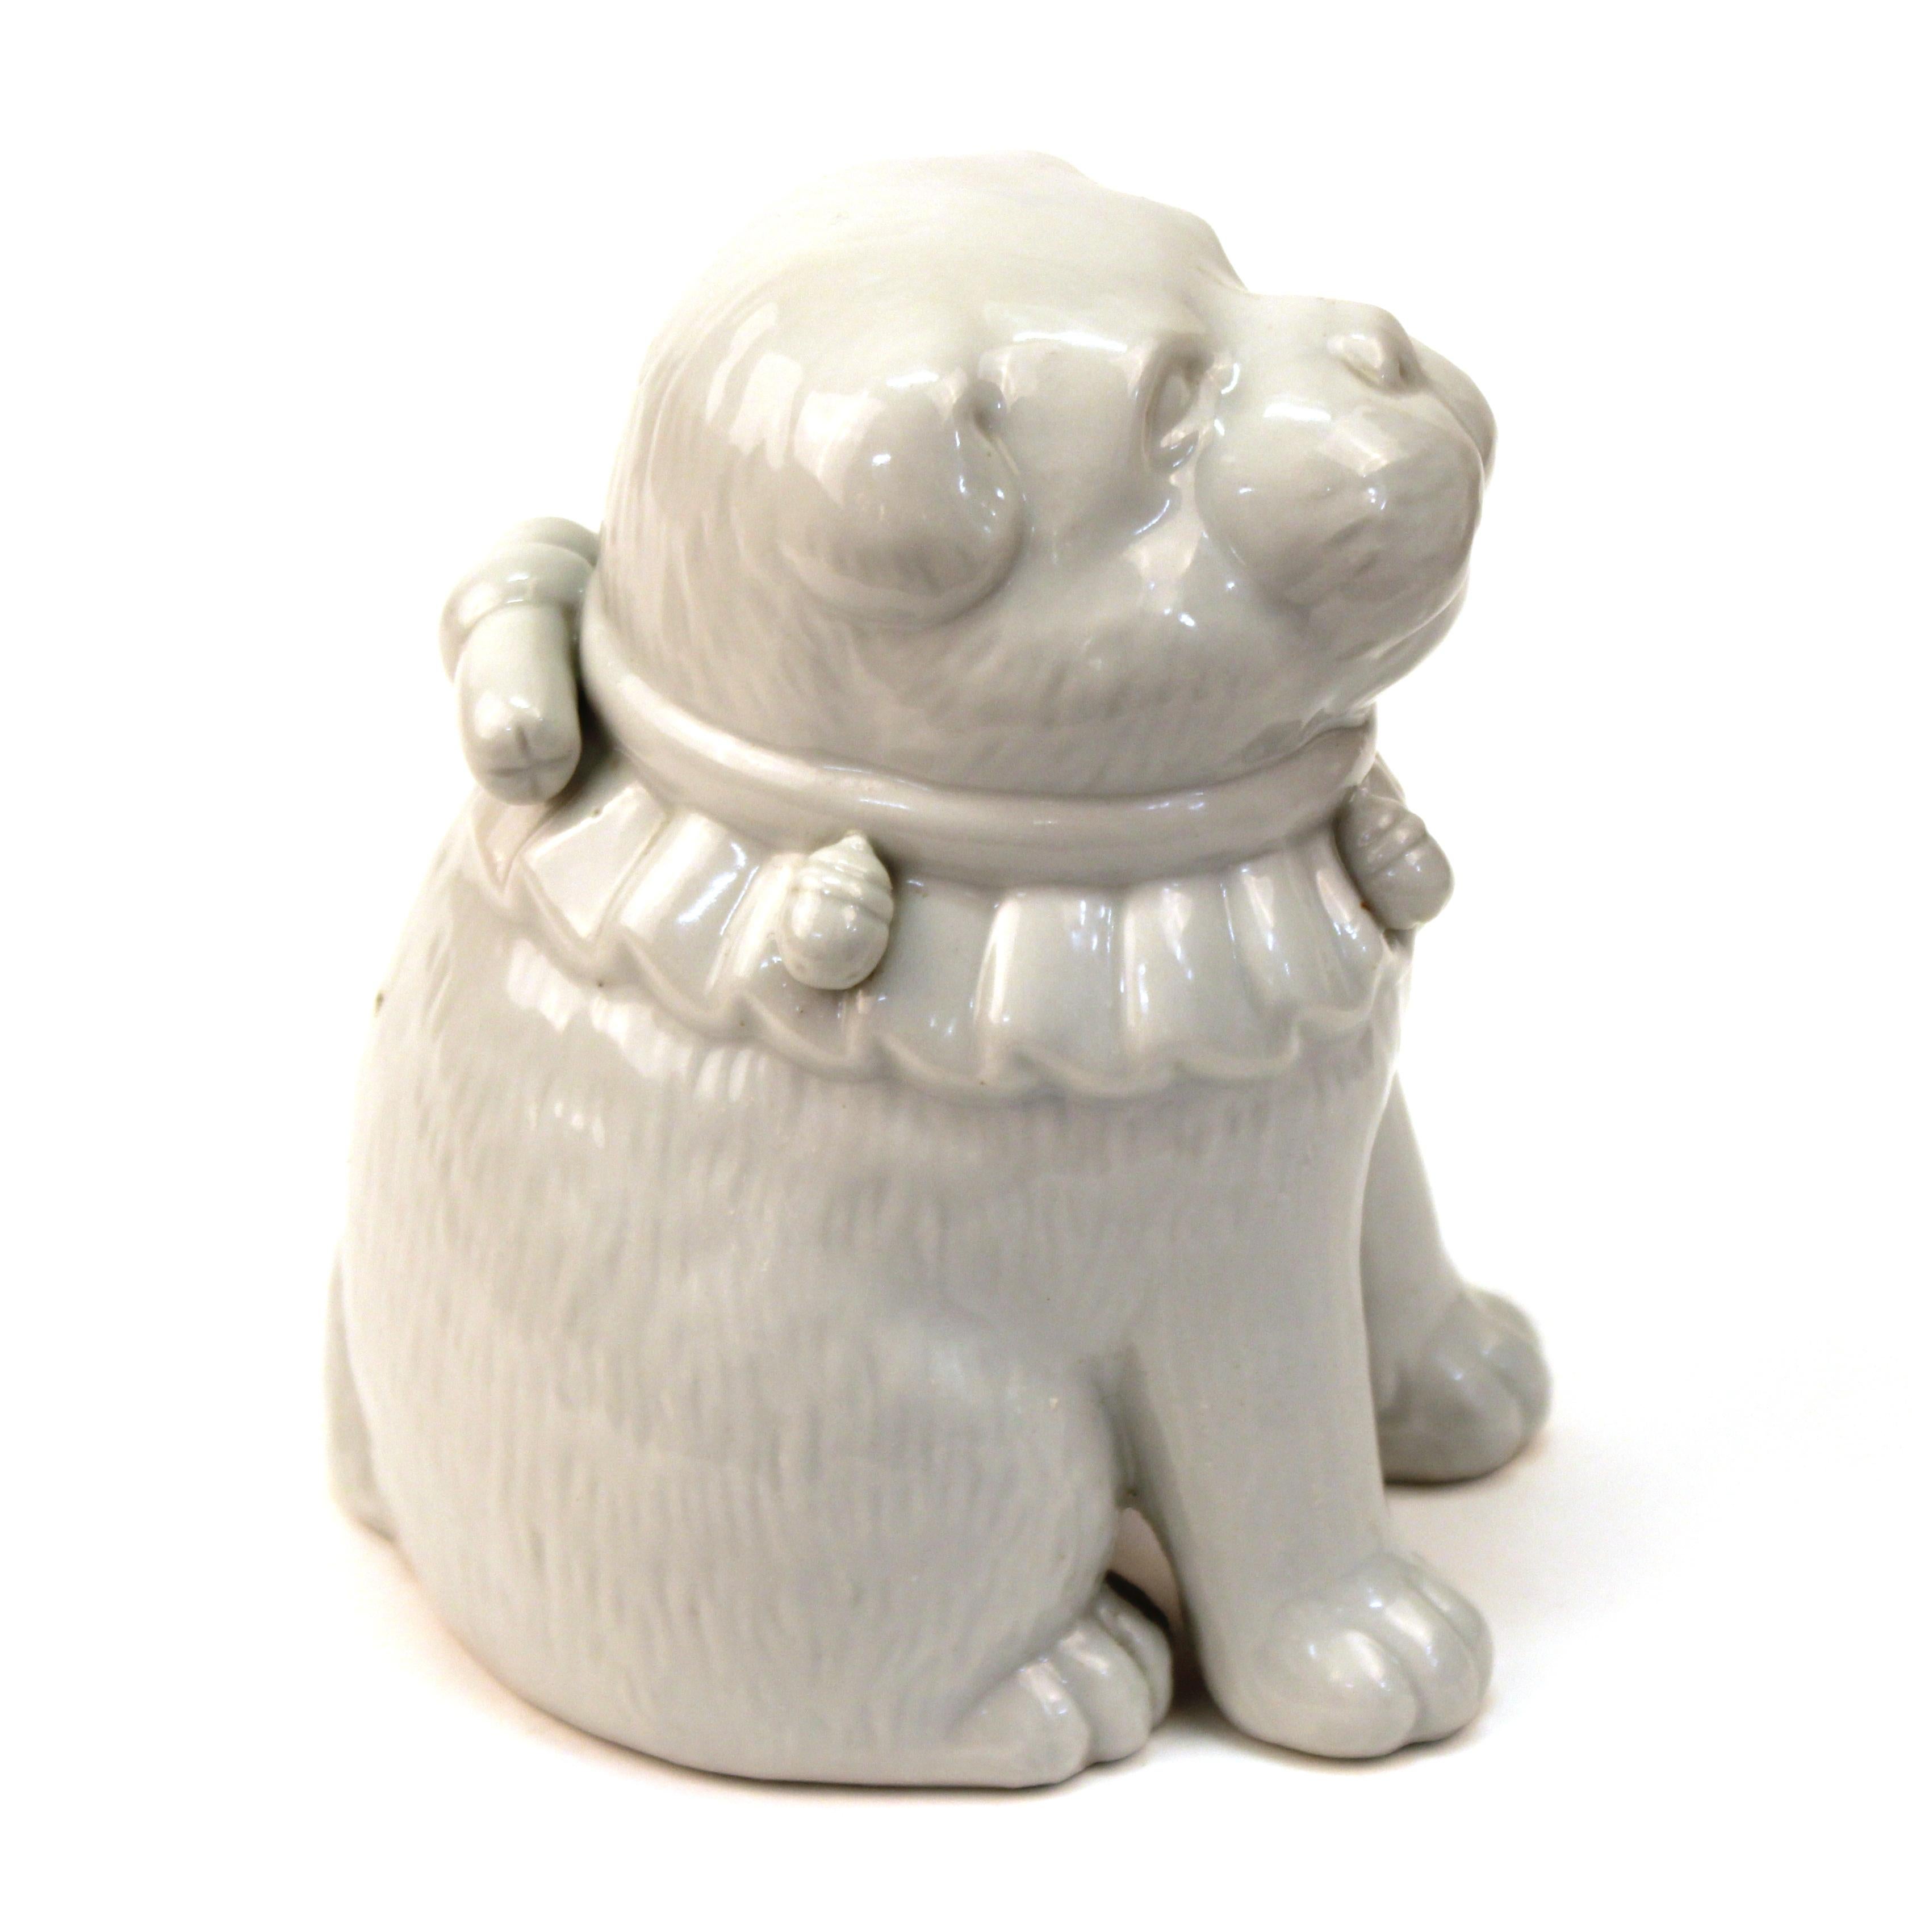 Japanese Meiji period glazed porcelain figure of a puppy dog, made by Hirado Porcelain. The puppy is wearing a collar with bells. Likely made in circa 1890. In great antique condition with age-appropriate wear and use.